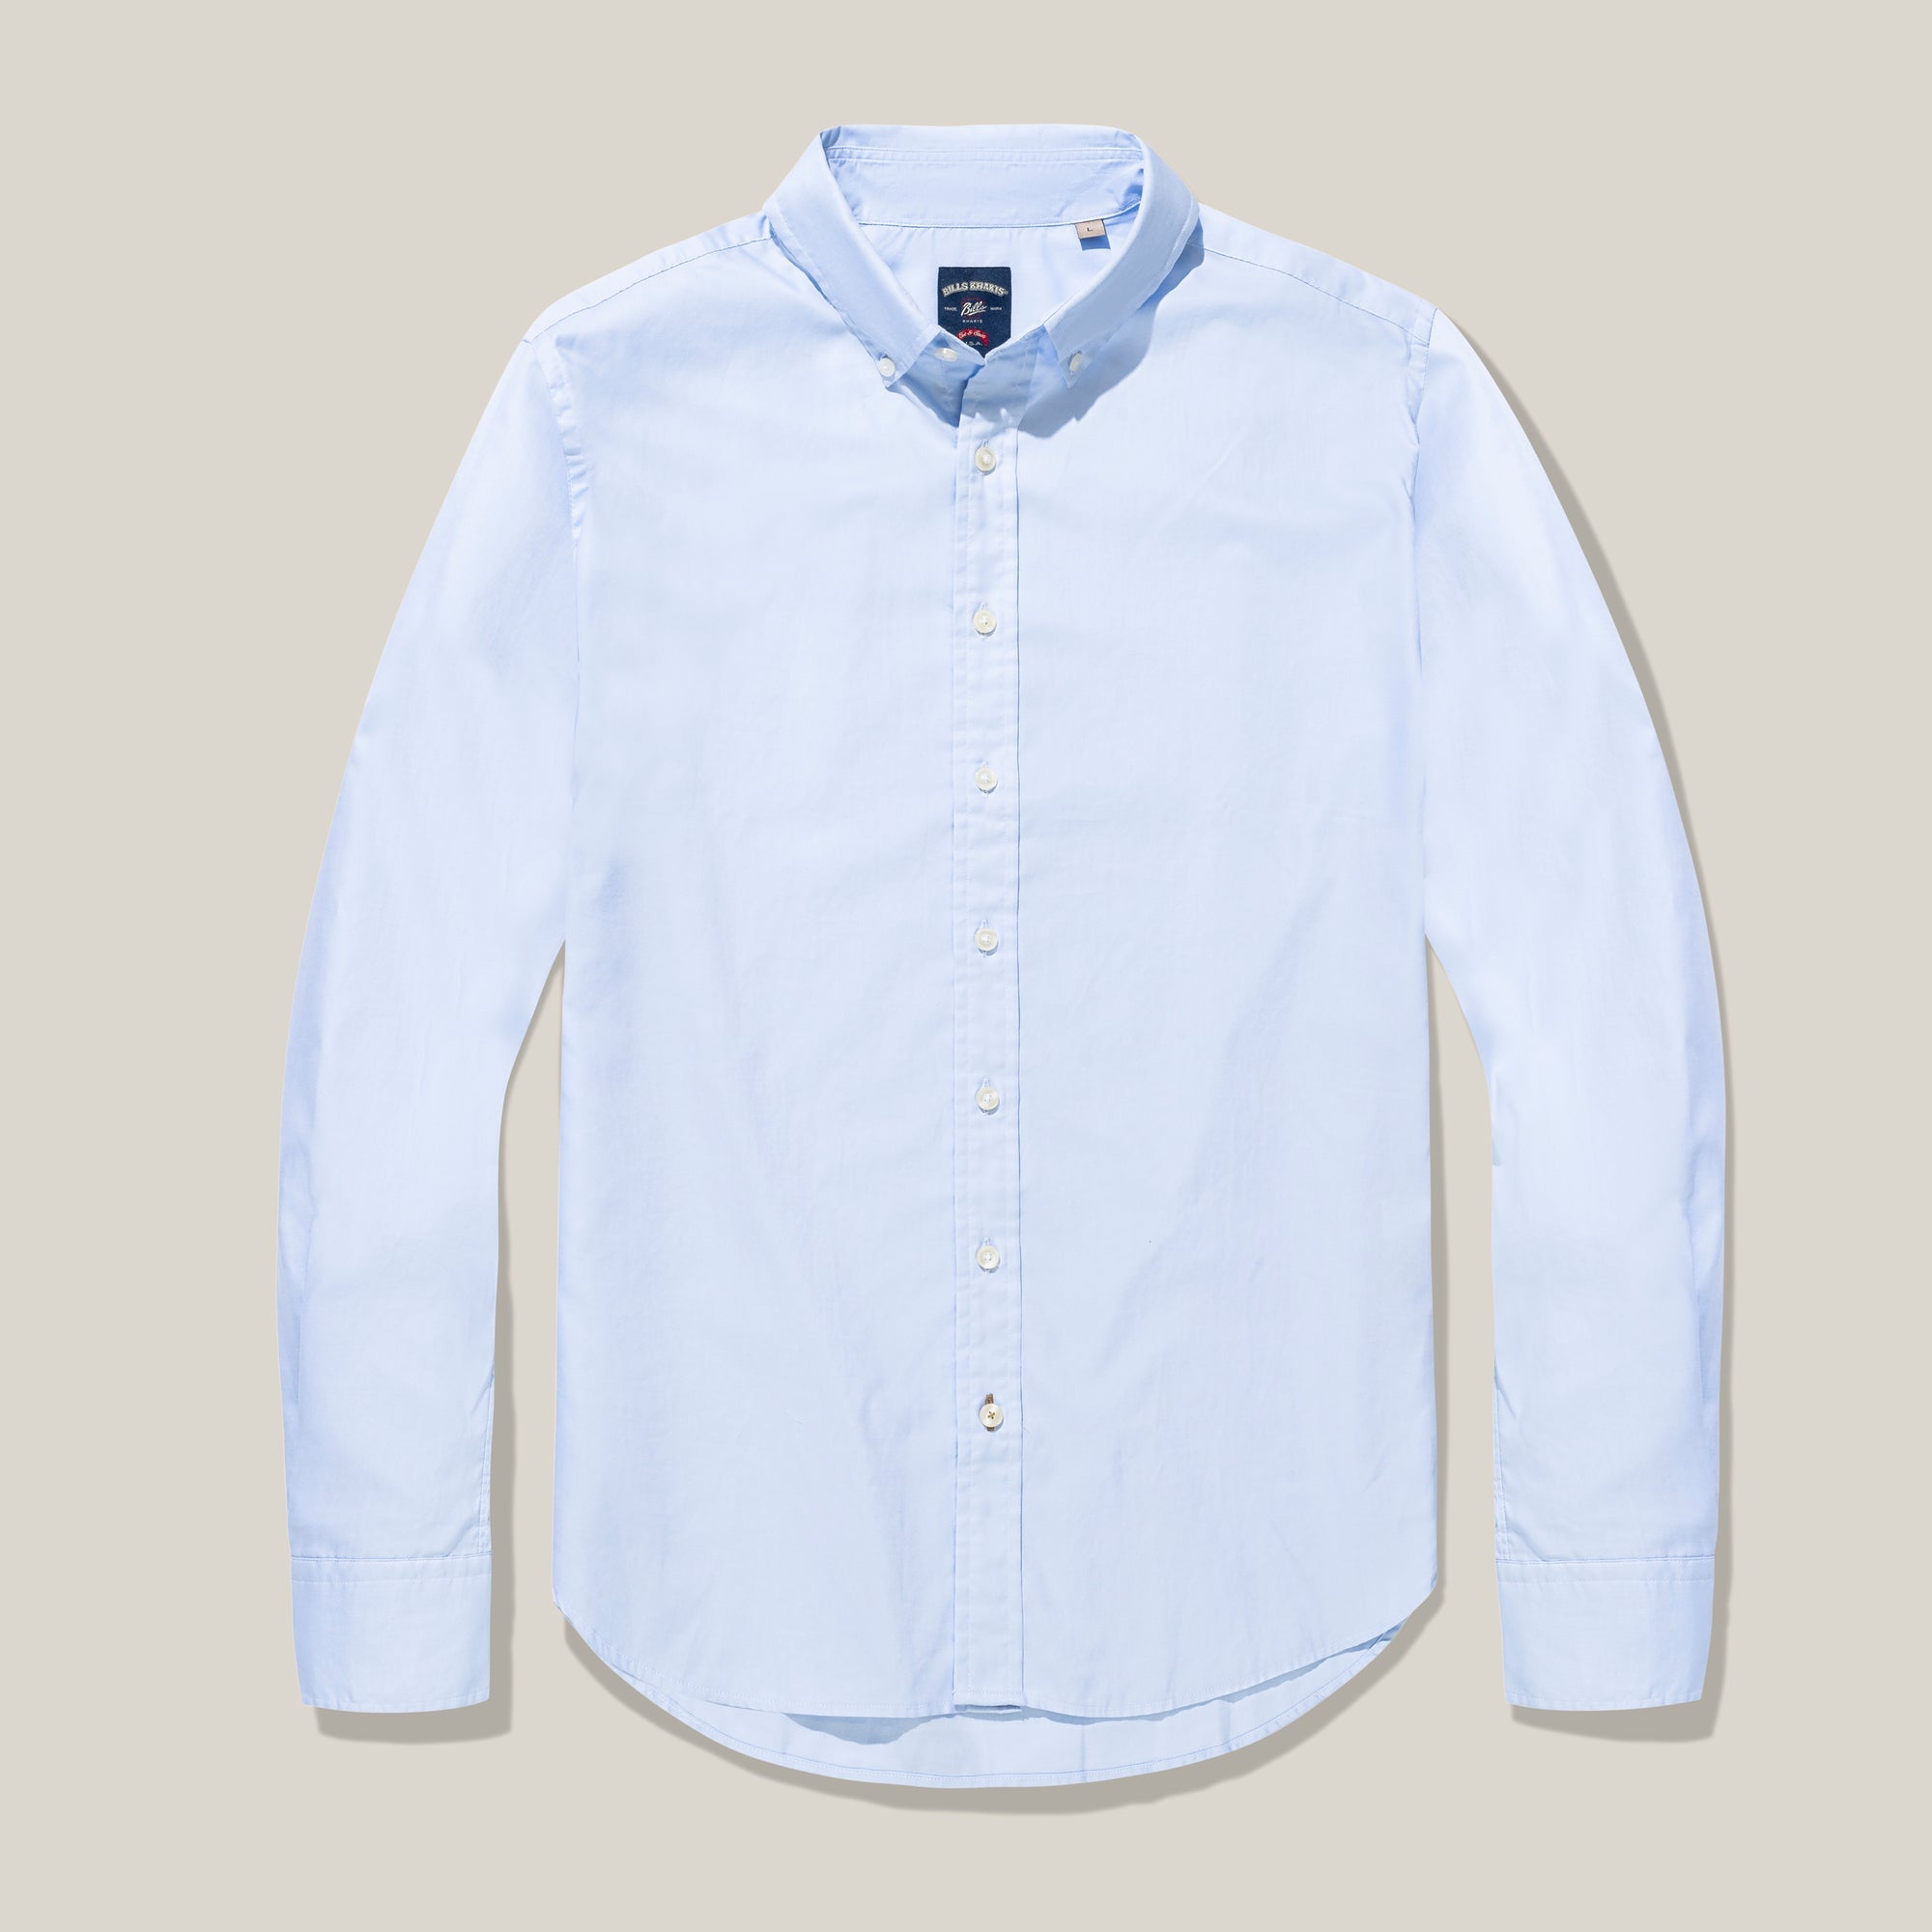 Weekender Fit Washed Oxford Sport Shirt in Blue by Bills Khakis